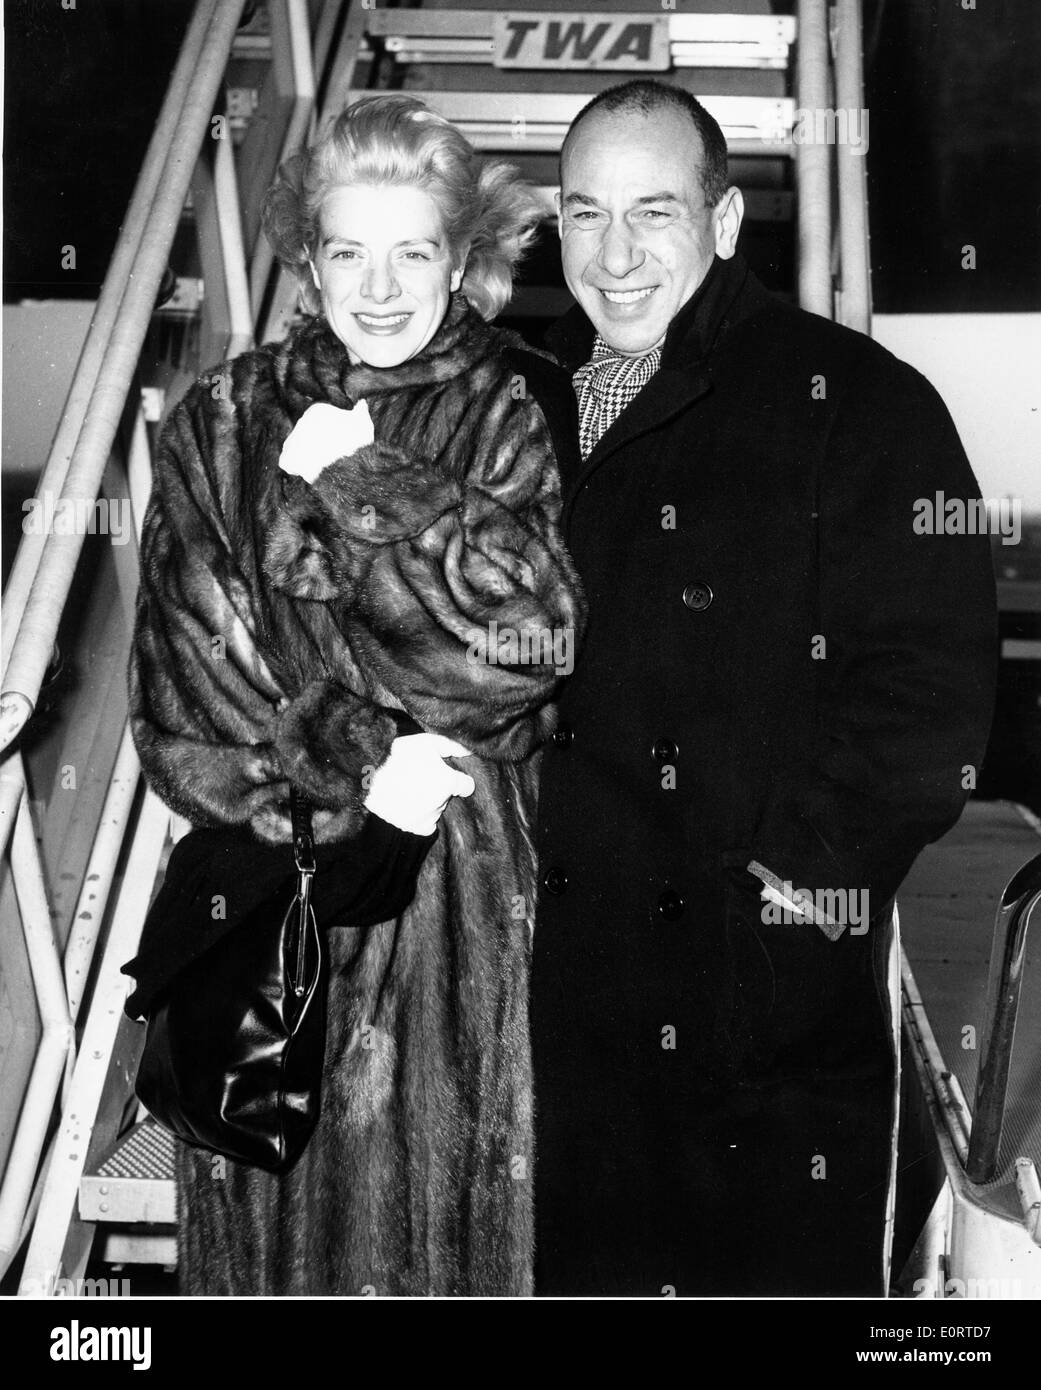 Actors Jose Ferrer and Rosemary Clooney at airport Stock Photo